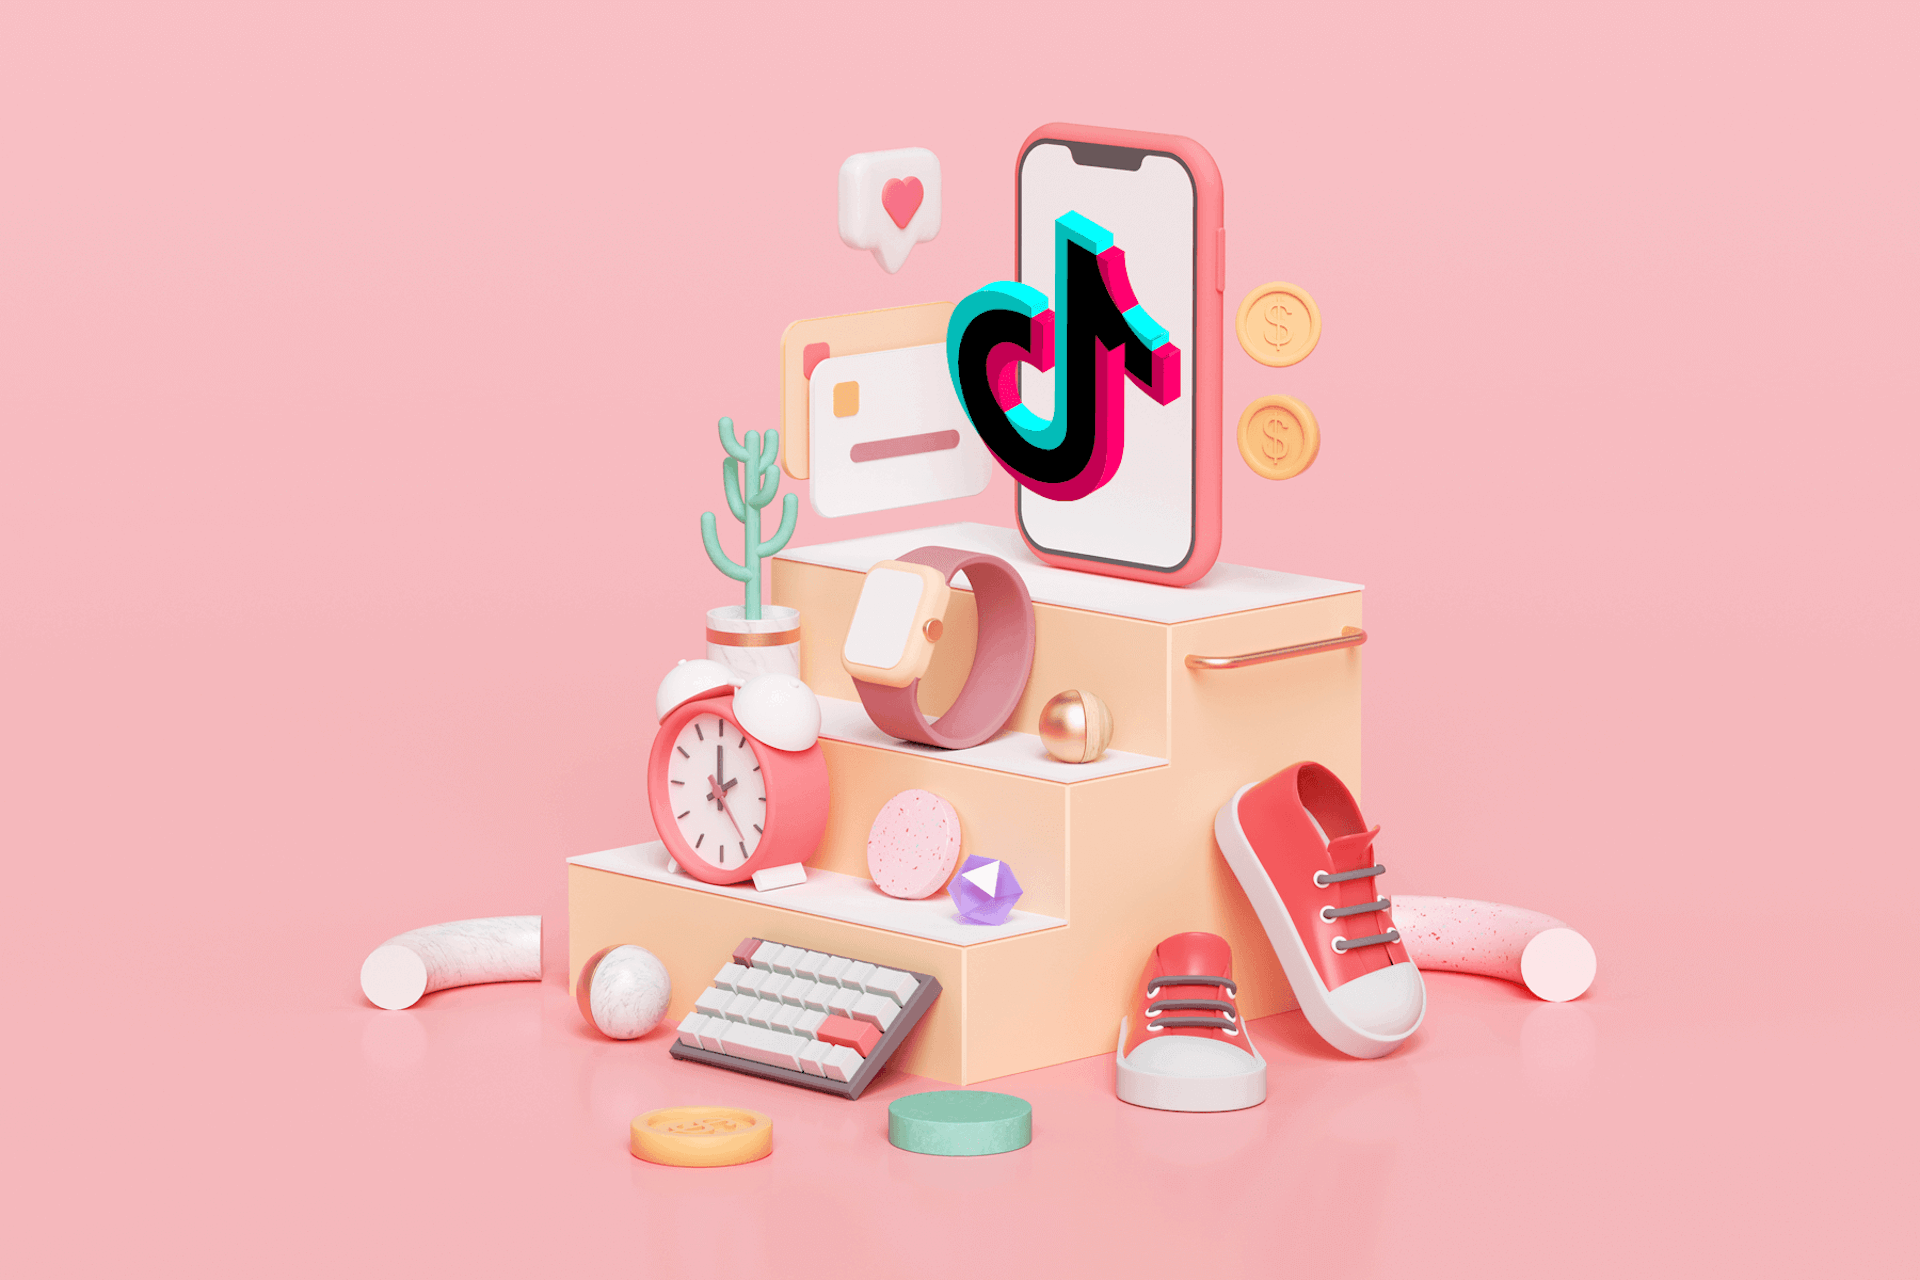 A phone with the TikTok logo stands at the top of a staircase scattered with items like an alarm clock and computer keyboard in this image for a blog about the hashtag #tiktokmademebuyit.